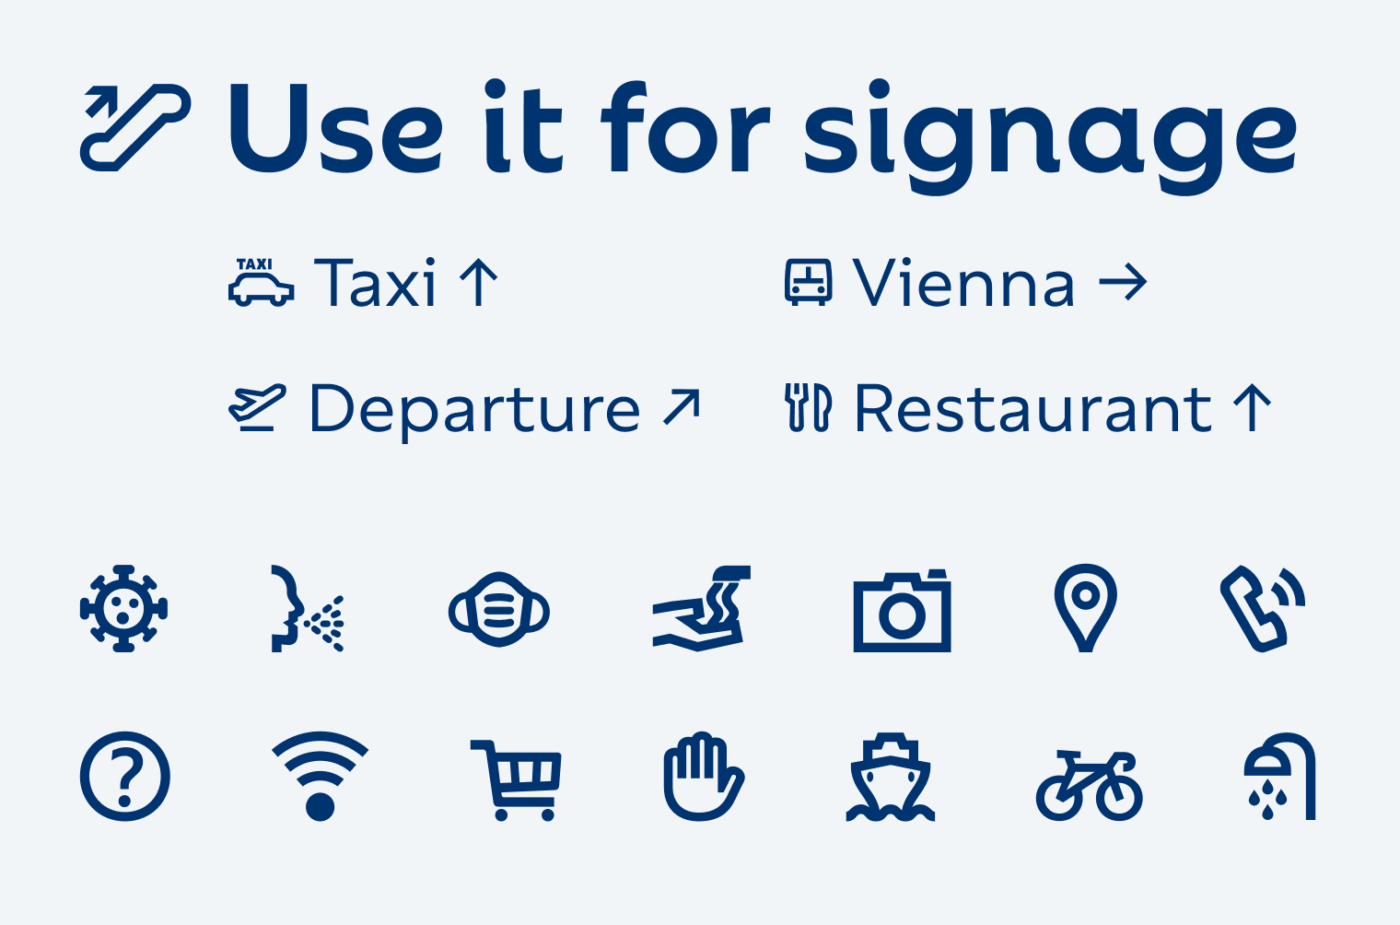 Use it for signage (showing various pictograms)